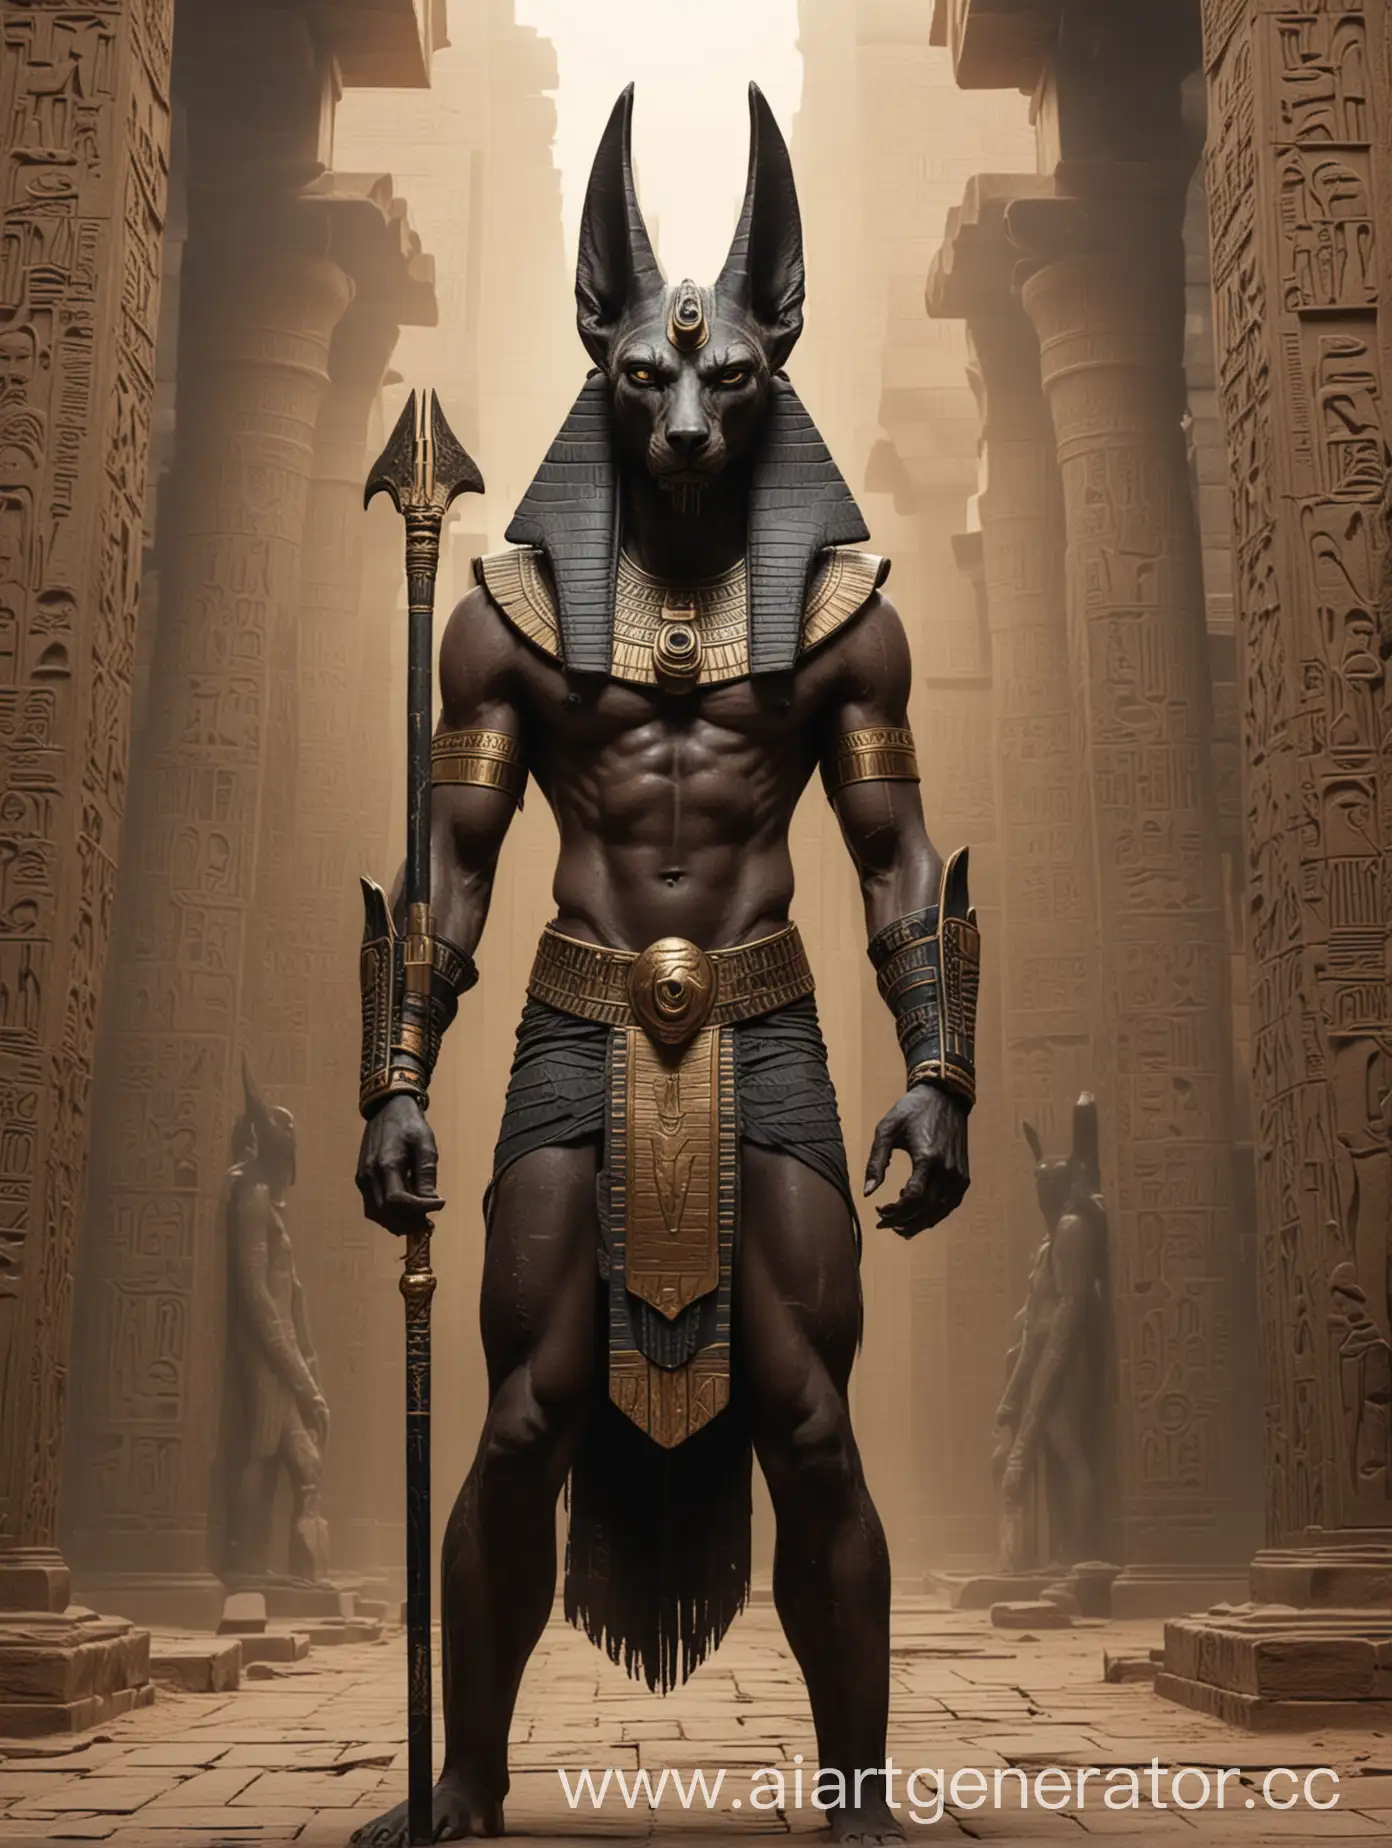 Sinister-Anubis-Statue-Brooding-Jackal-Deity-Guards-His-Temple